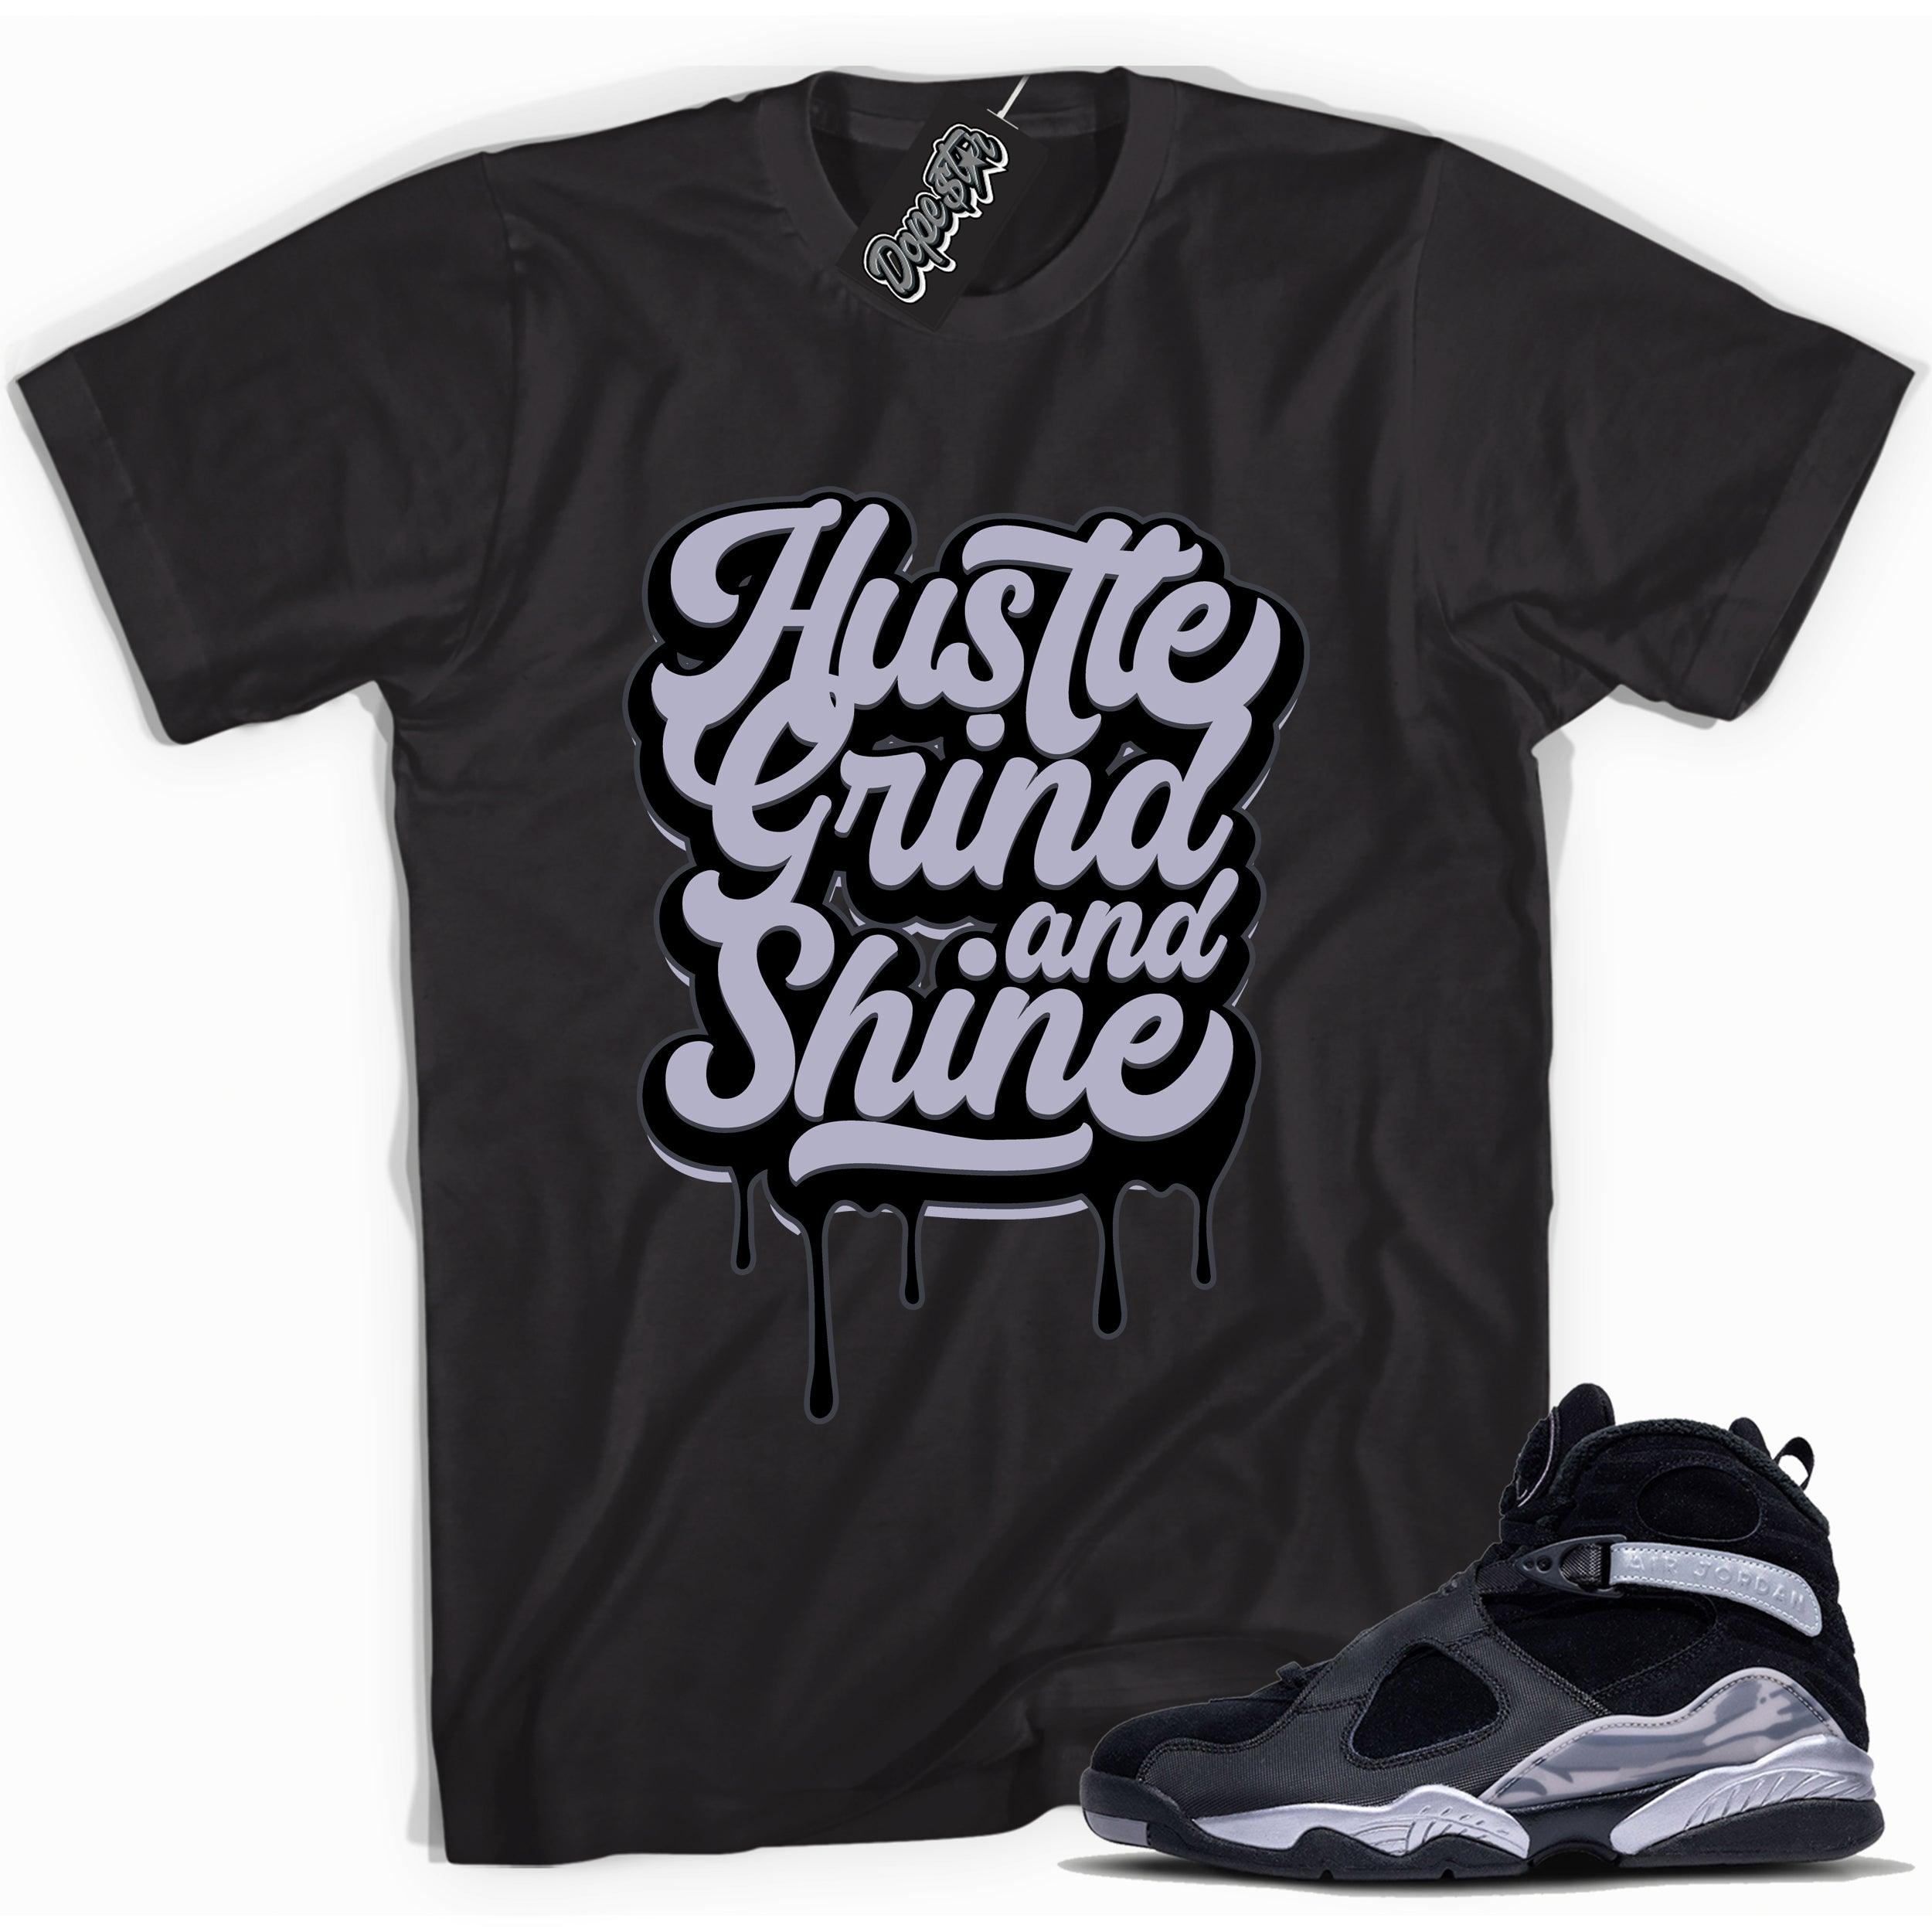 Cool Black graphic tee with “ Hustle Grind and Shine ” print, that perfectly matches Air Jordan 8 Winterized  sneakers 